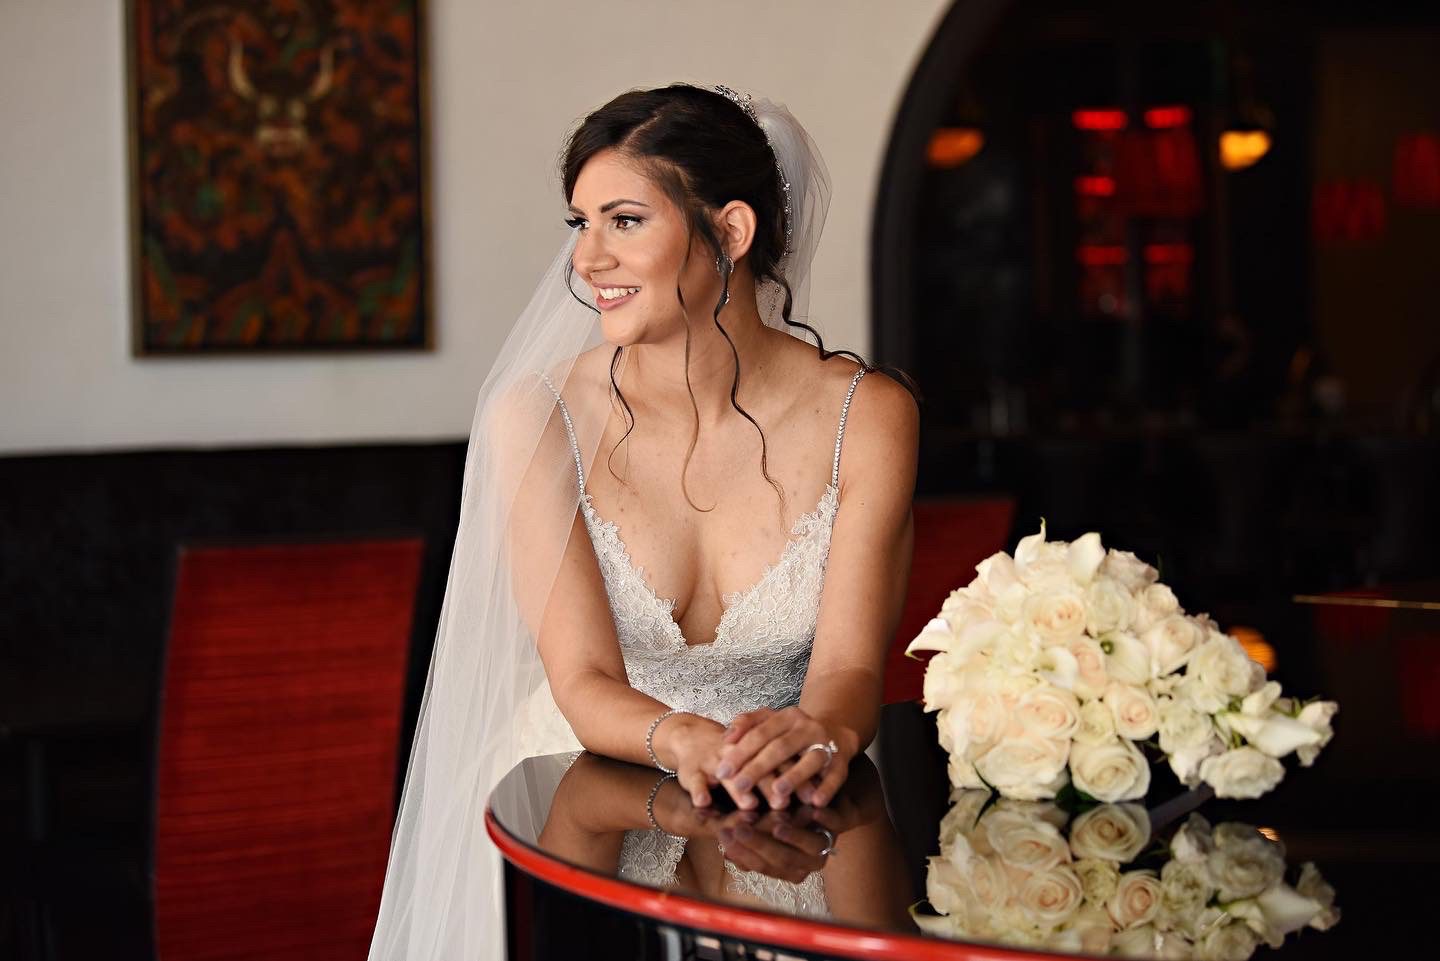 A Bride Leaning on a Table With a Bouquet